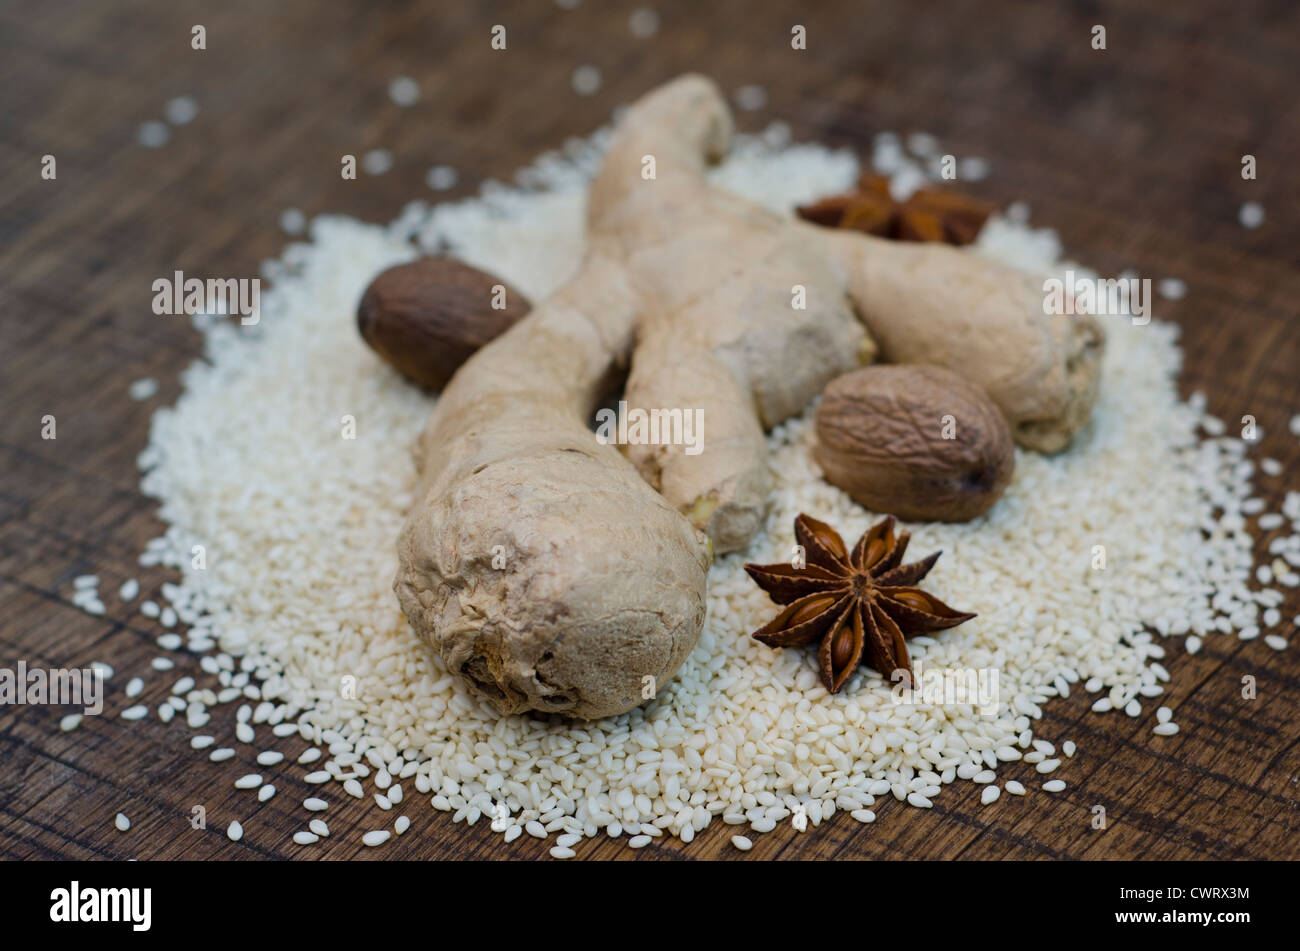 Spices, ginger root, star anise and nutmeg, arranged on a bed of hulled sesame seeds on a dark wooden surface. Stock Photo